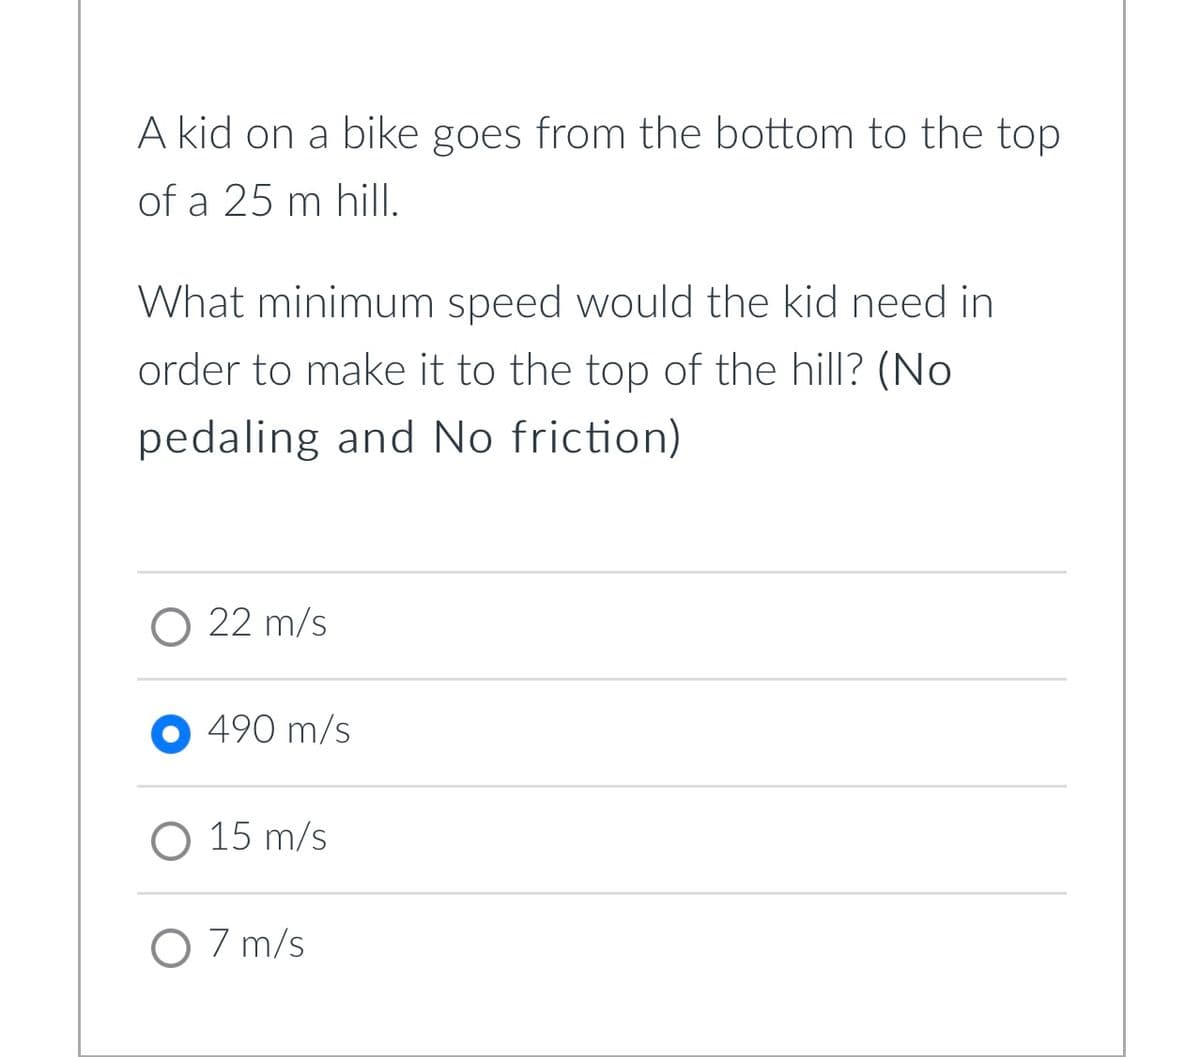 A kid on a bike goes from the bottom to the top
of a 25 m hill.
What minimum speed would the kid need in
order to make it to the top of the hill? (No
pedaling and No friction)
22 m/s
490 m/s
O 15 m/s
O 7 m/s